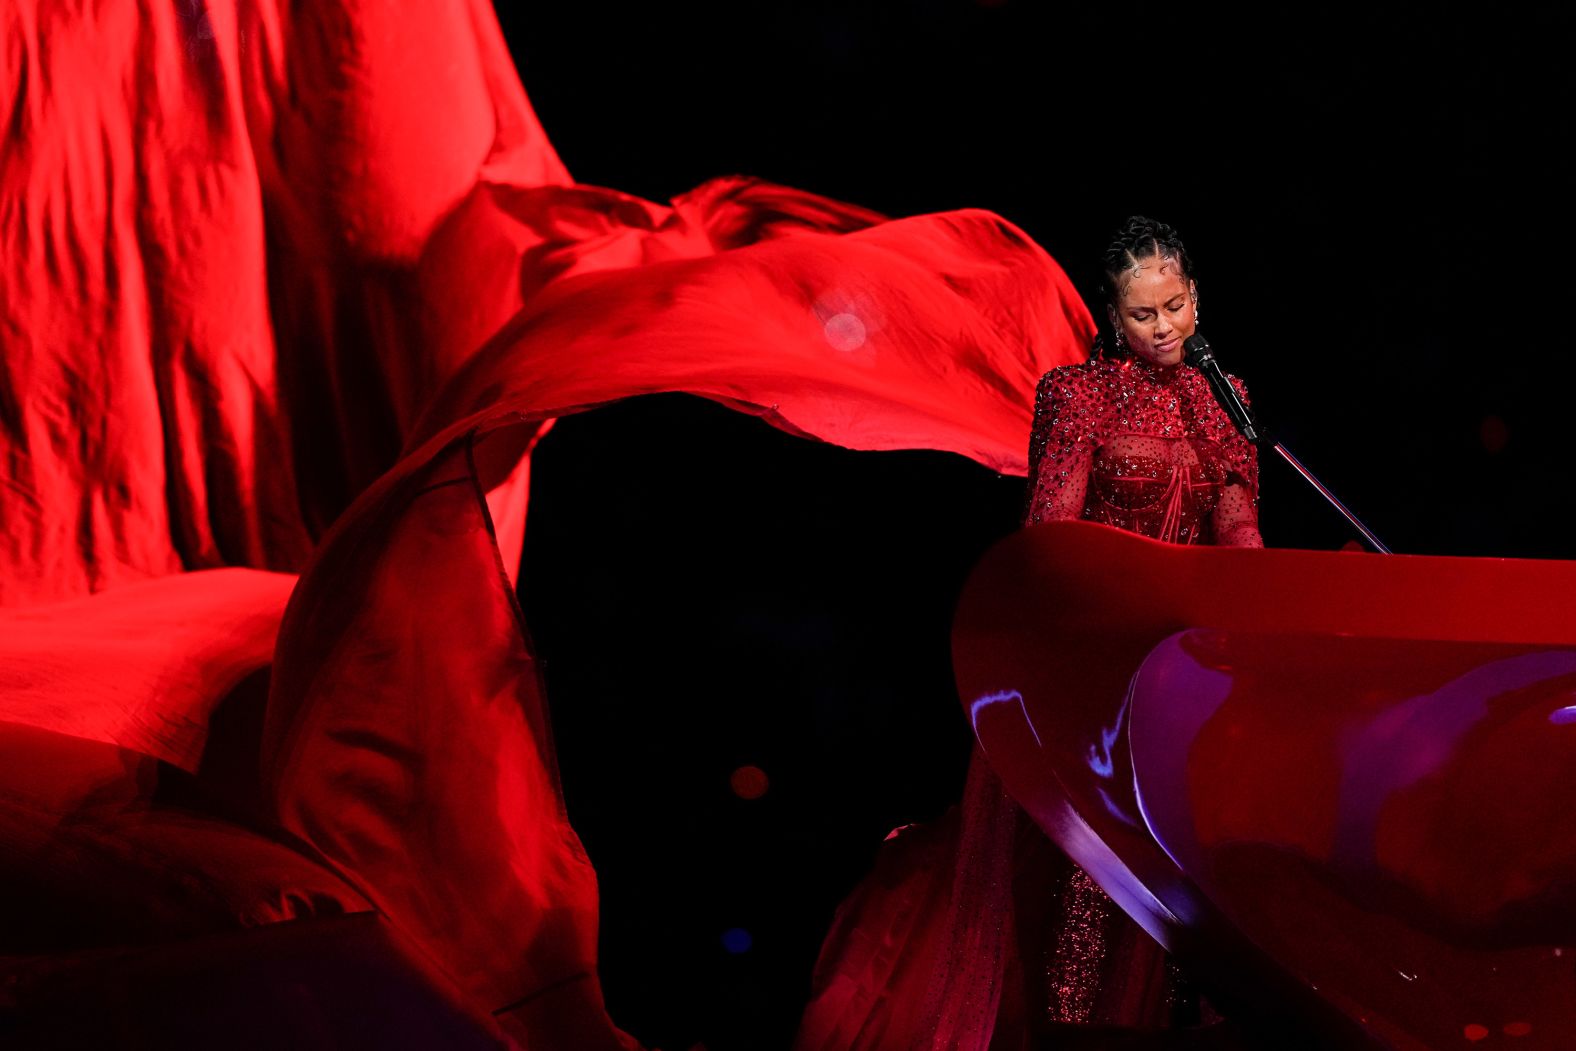 Alicia Keys plays the piano during the Super Bowl halftime show on Sunday, February 11. The show was headlined by Usher, but he was joined by several guests that included Keys, H.E.R., Lil Jon and Ludacris.